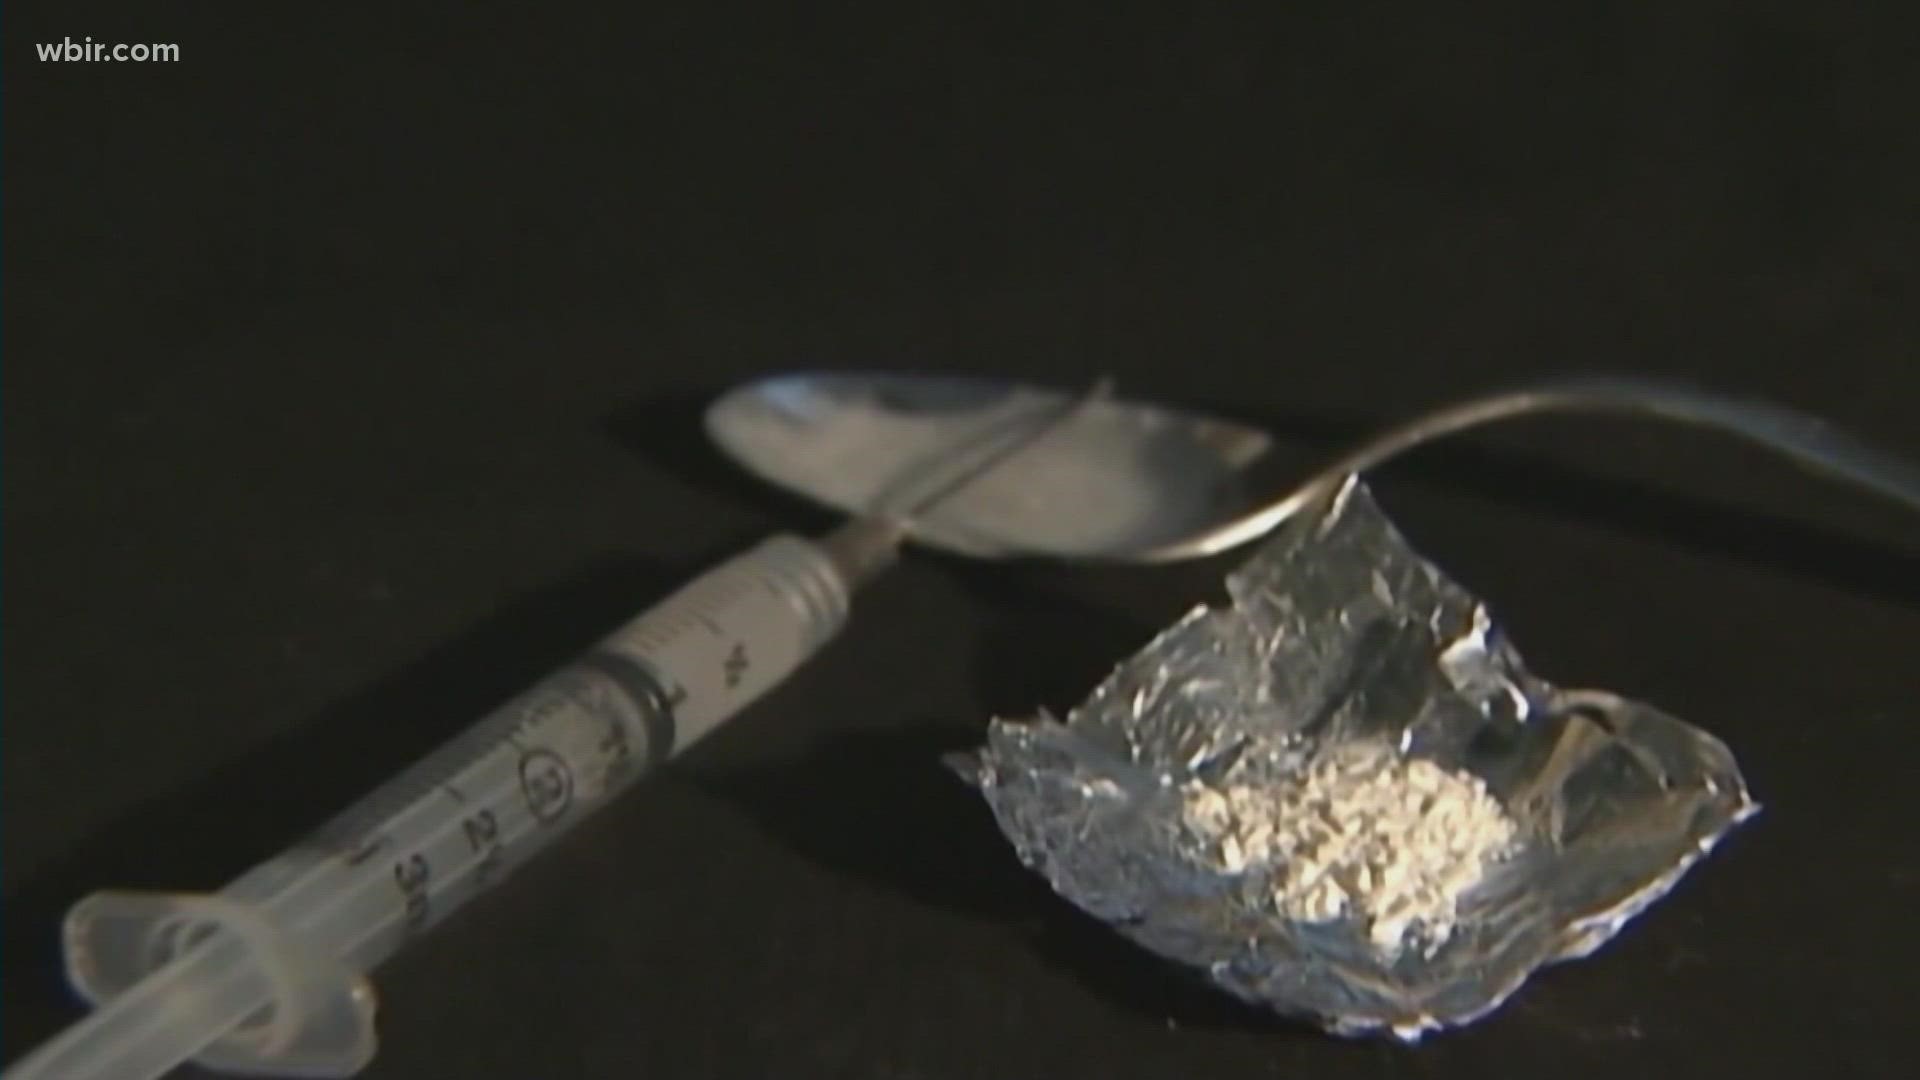 The district attorney general said 384 people have died of suspected drug overdoses -- a new record.